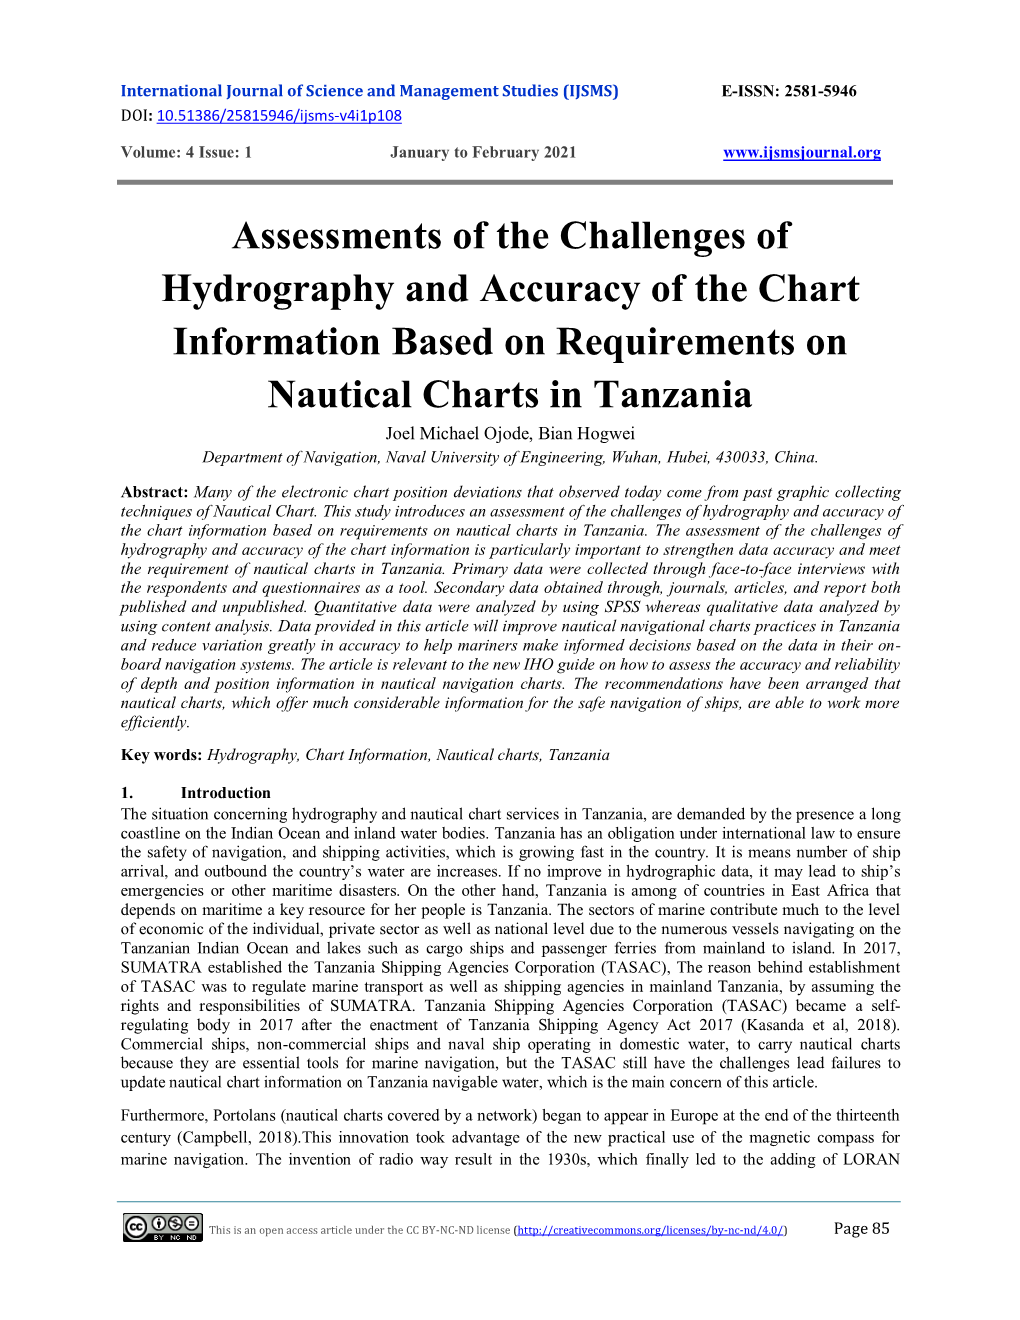 Assessments of the Challenges of Hydrography and Accuracy of The